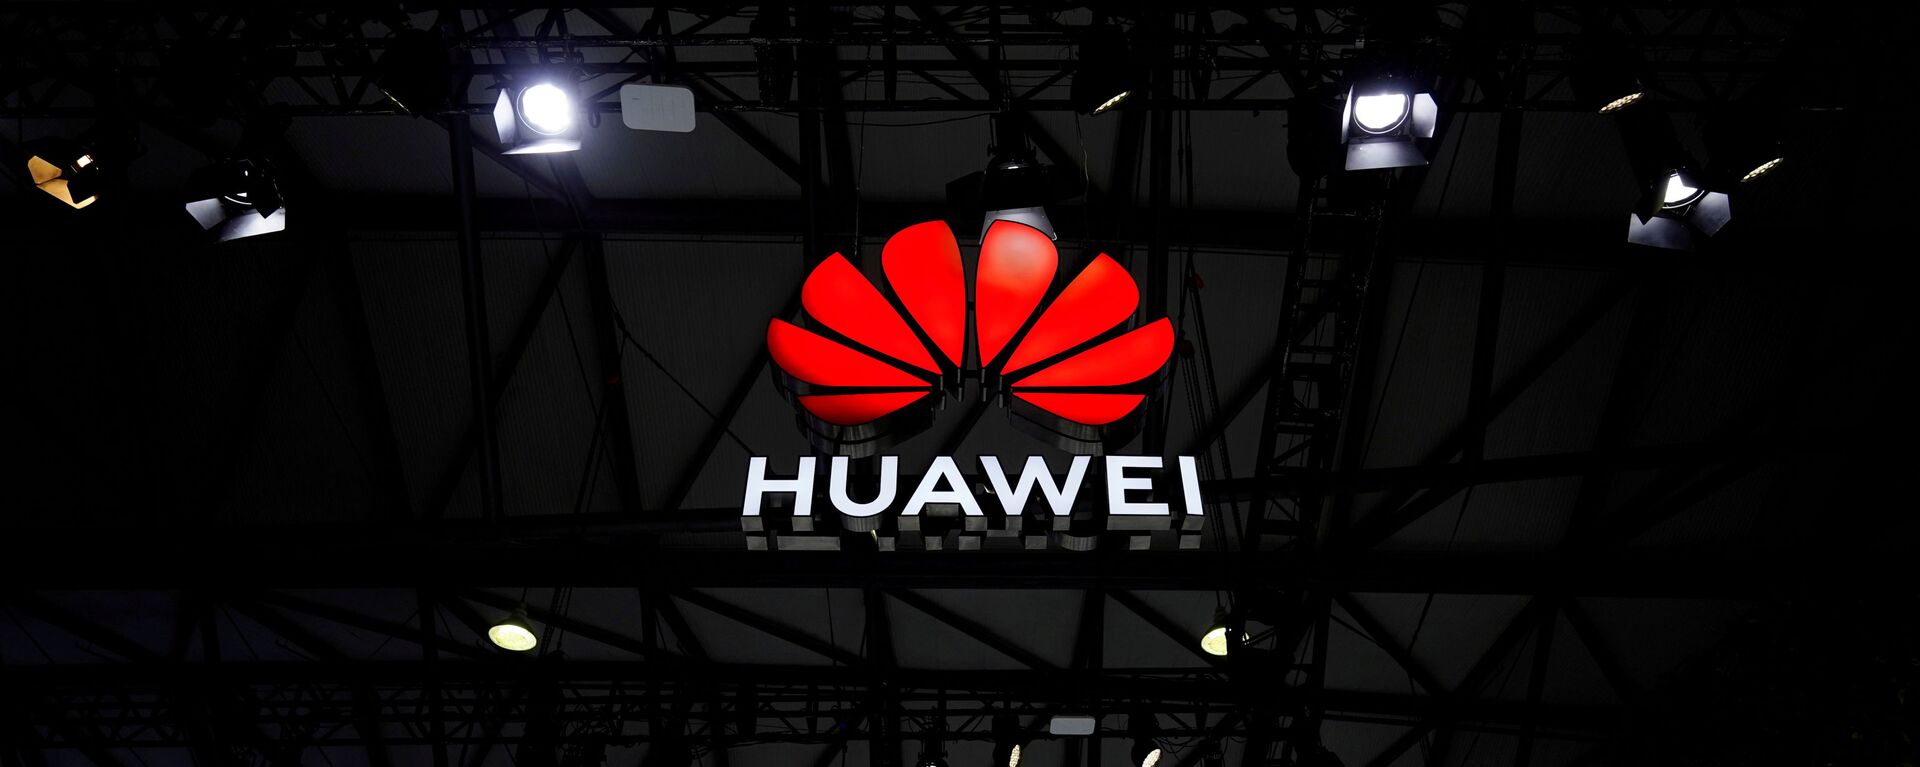 A Huawei logo is seen at the Mobile World Congress (MWC) in Shanghai, China February 23, 2021 - Sputnik International, 1920, 08.12.2021